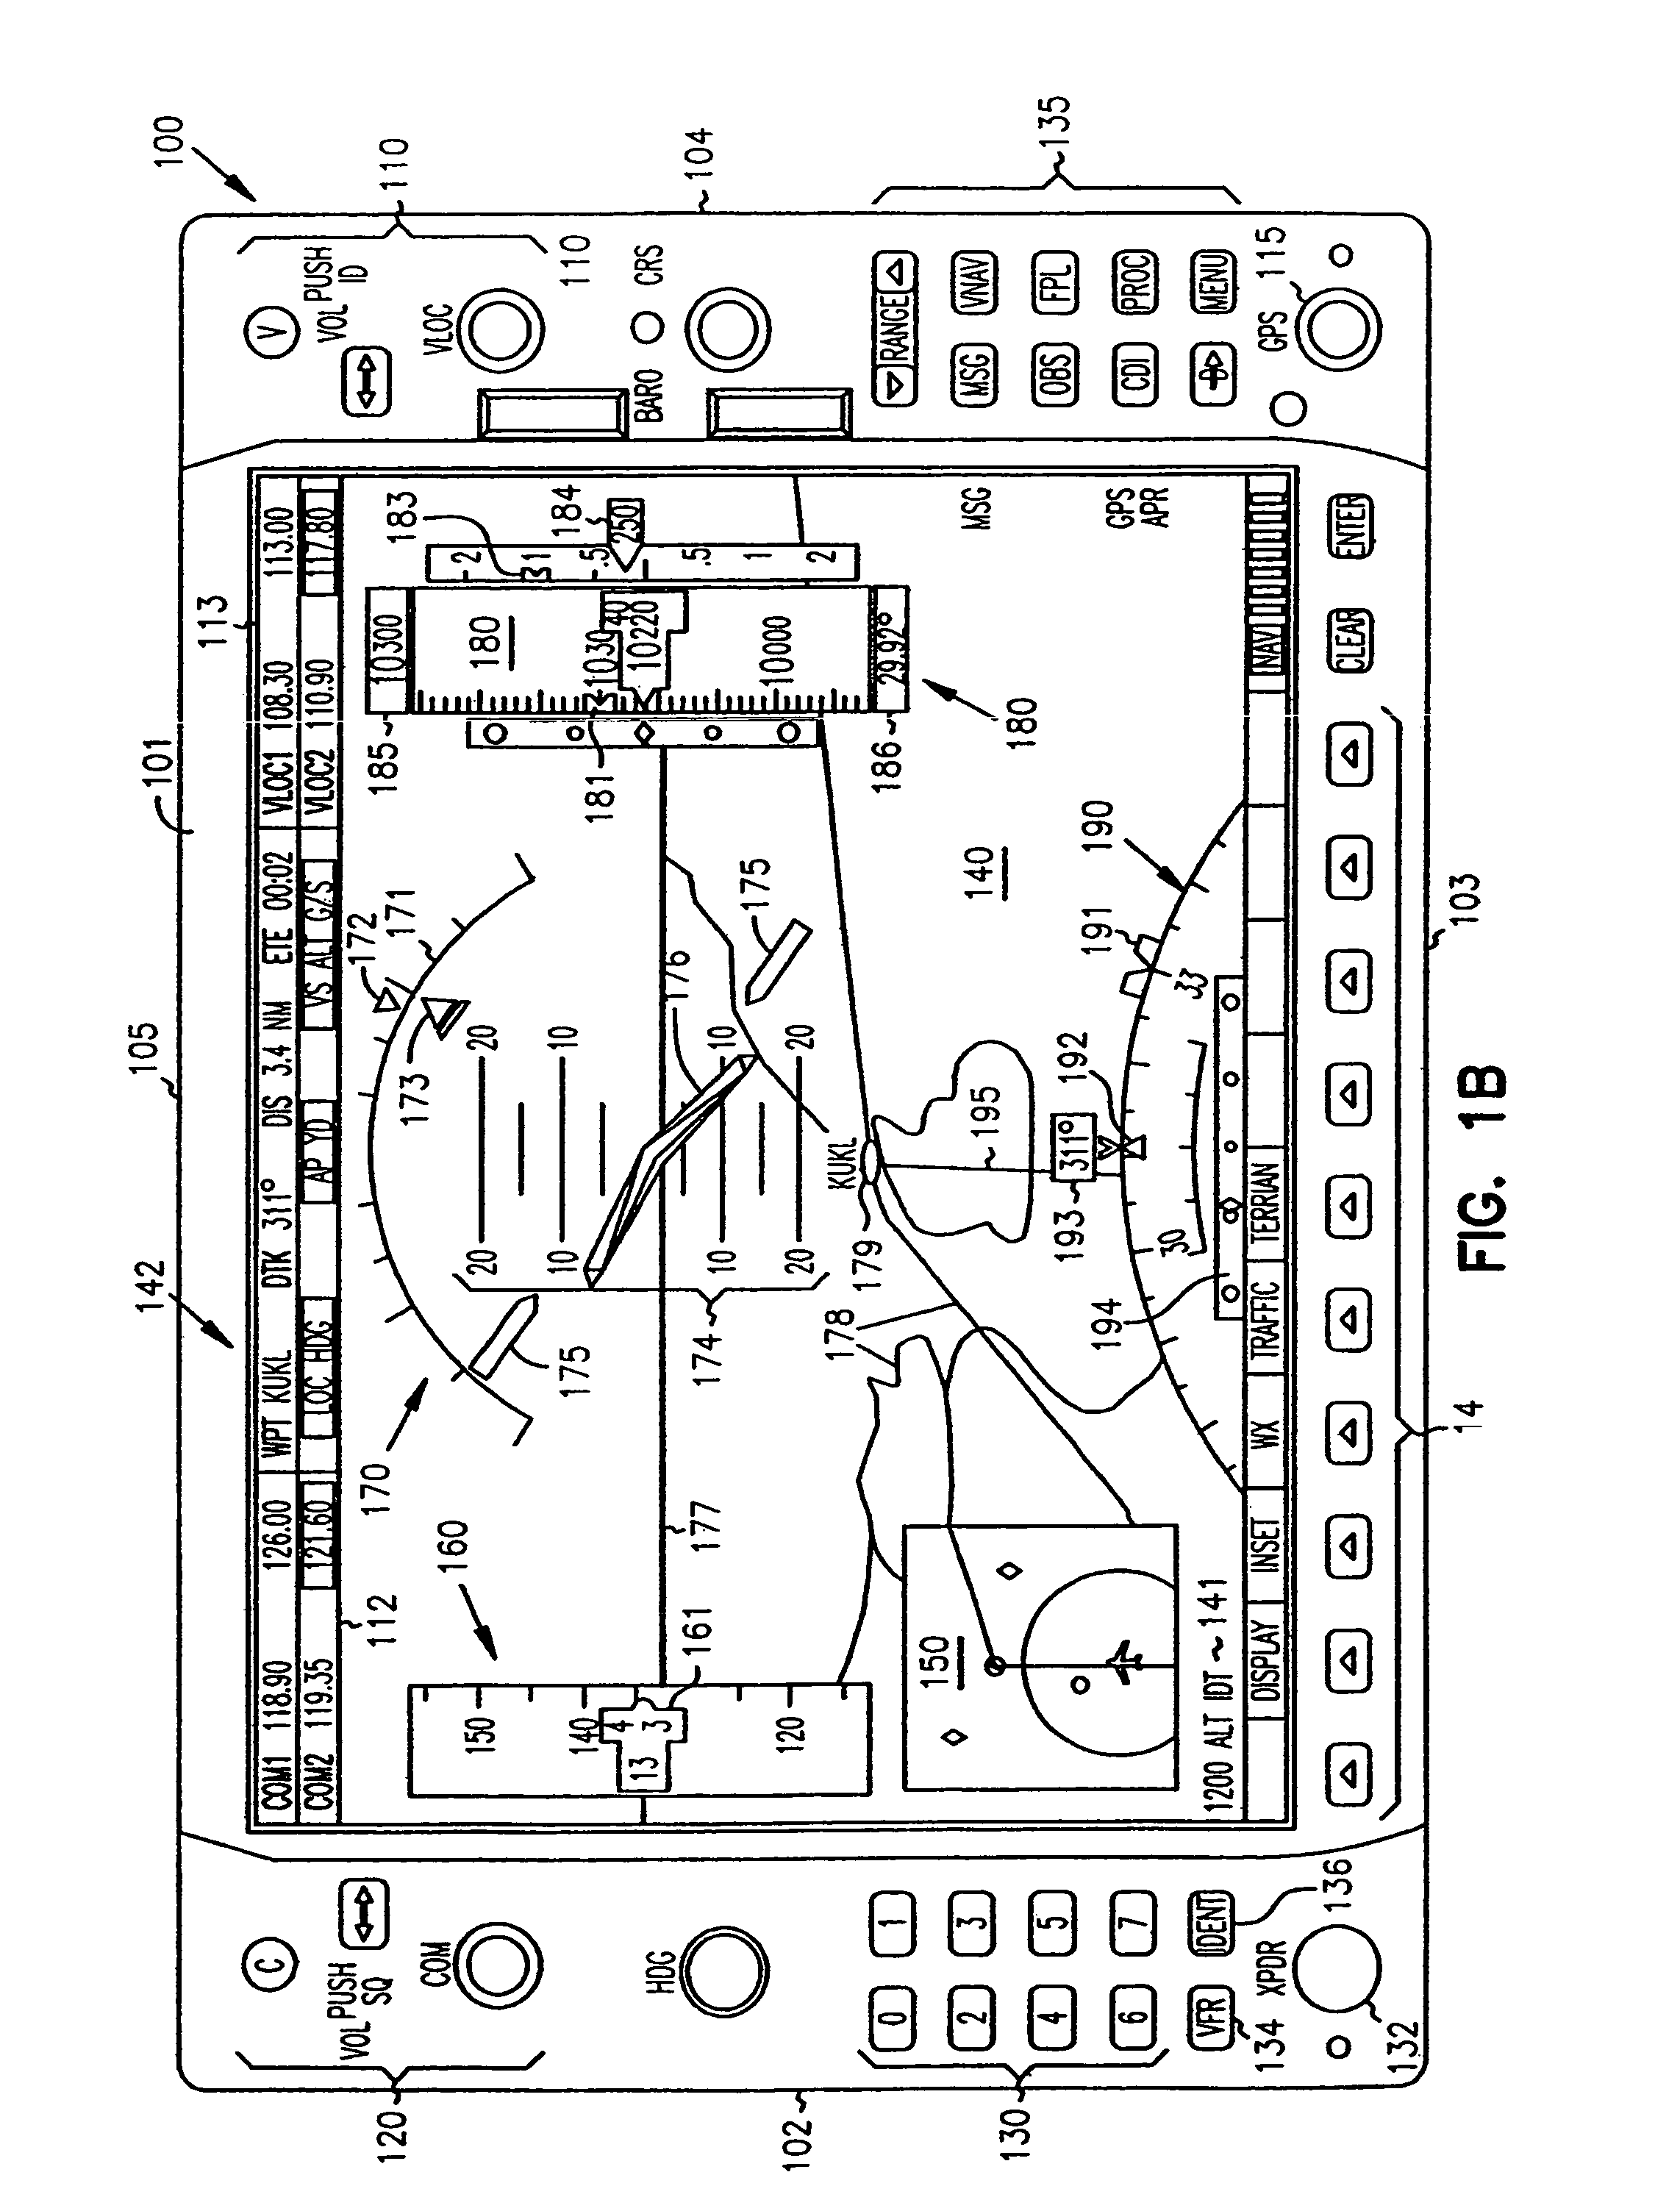 Cockpit instrument panel systems and methods with variable perspective flight display